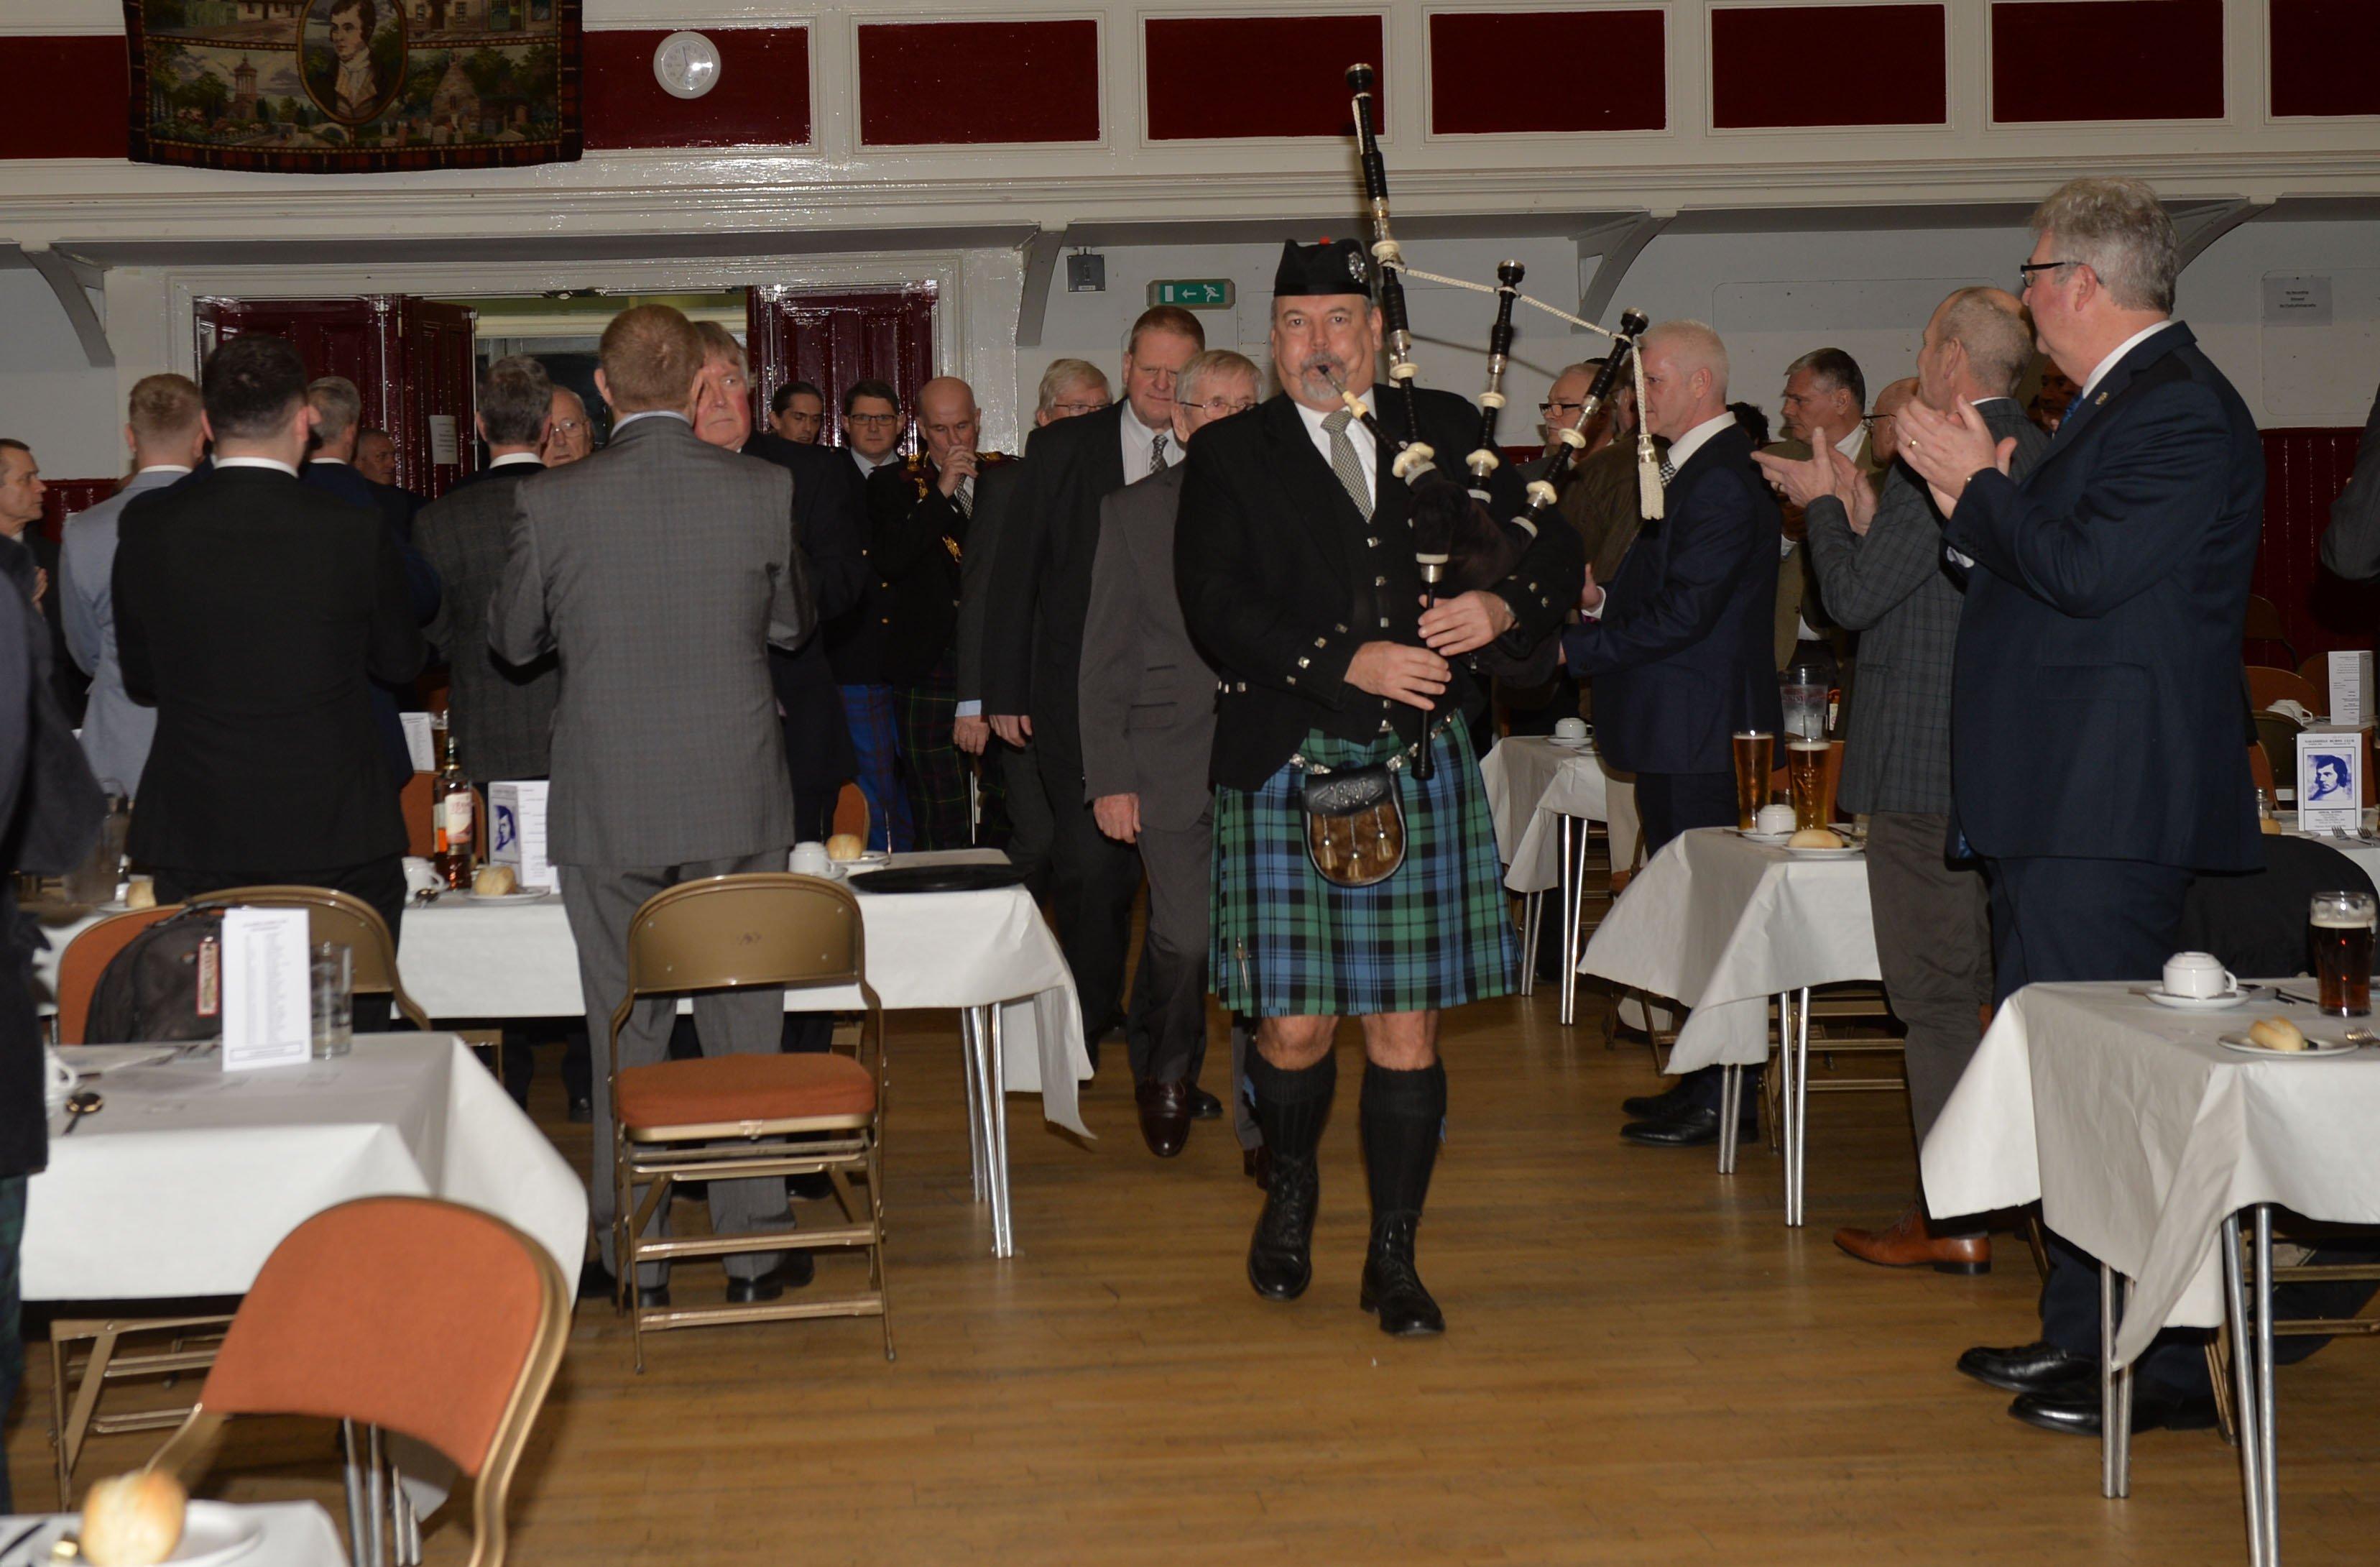 Piping in the top table, led by Bruce Hastie.